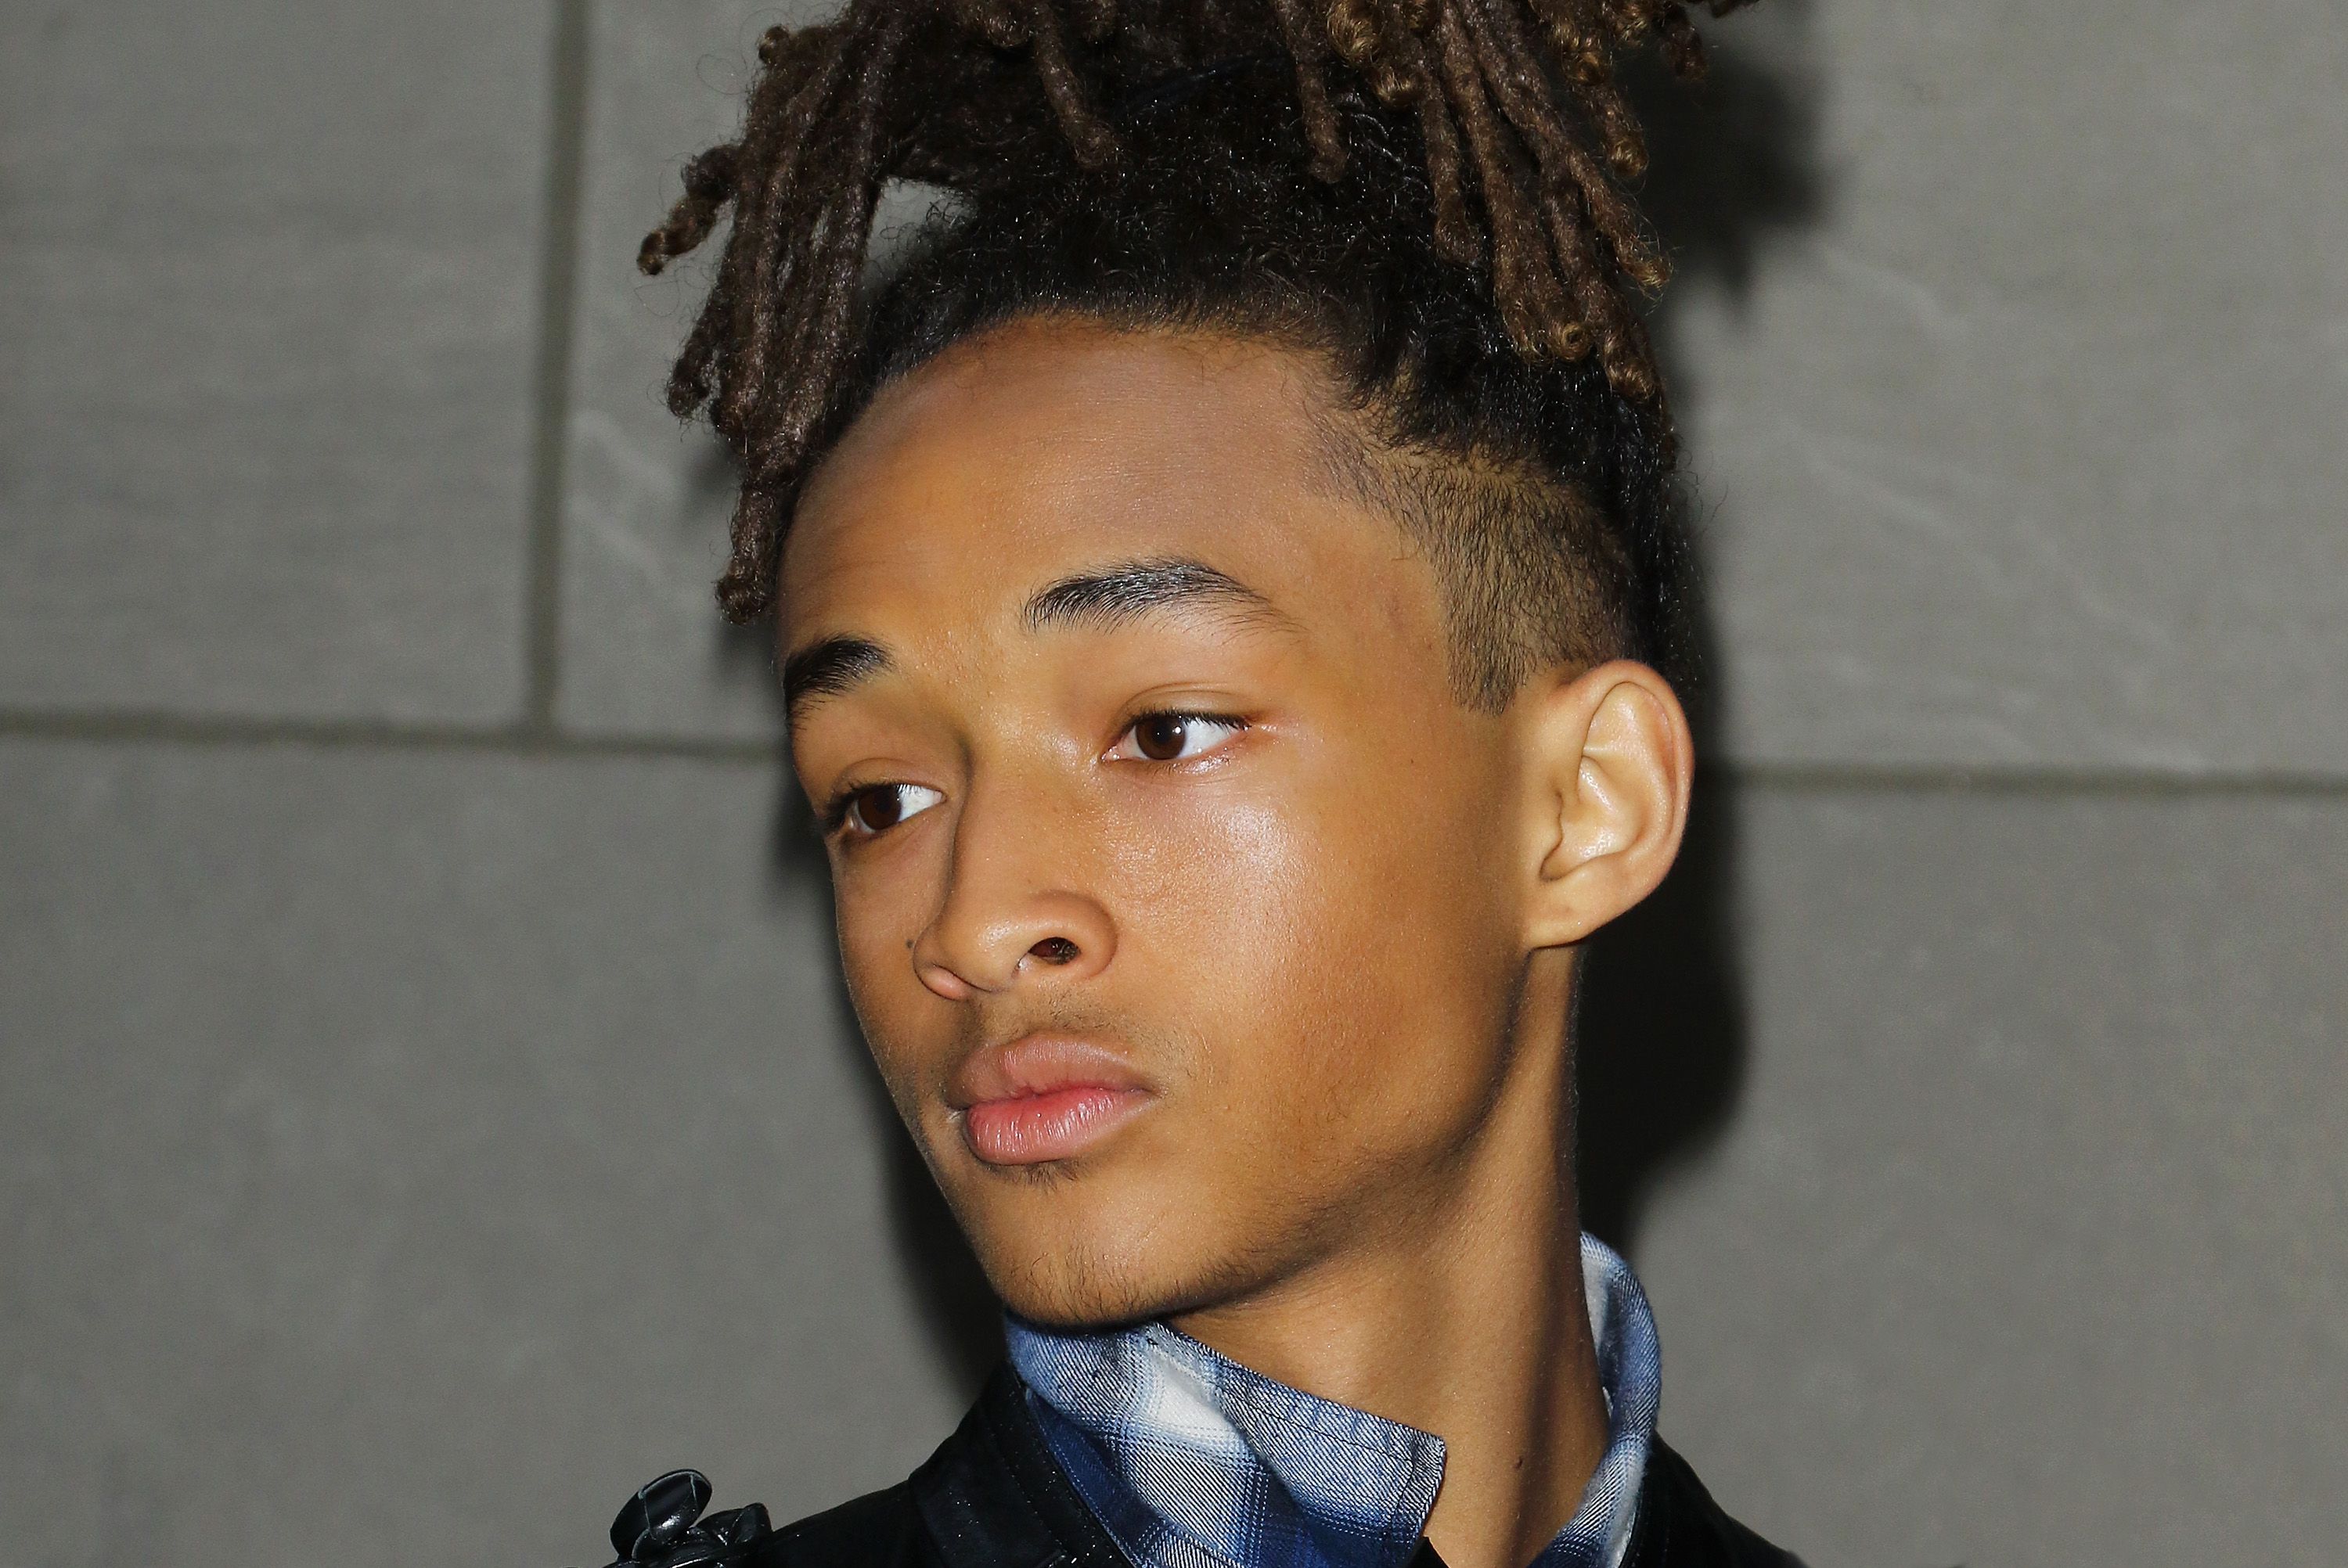 louis vuitton's new campaign stars jaden smith (and his met gala dreads)